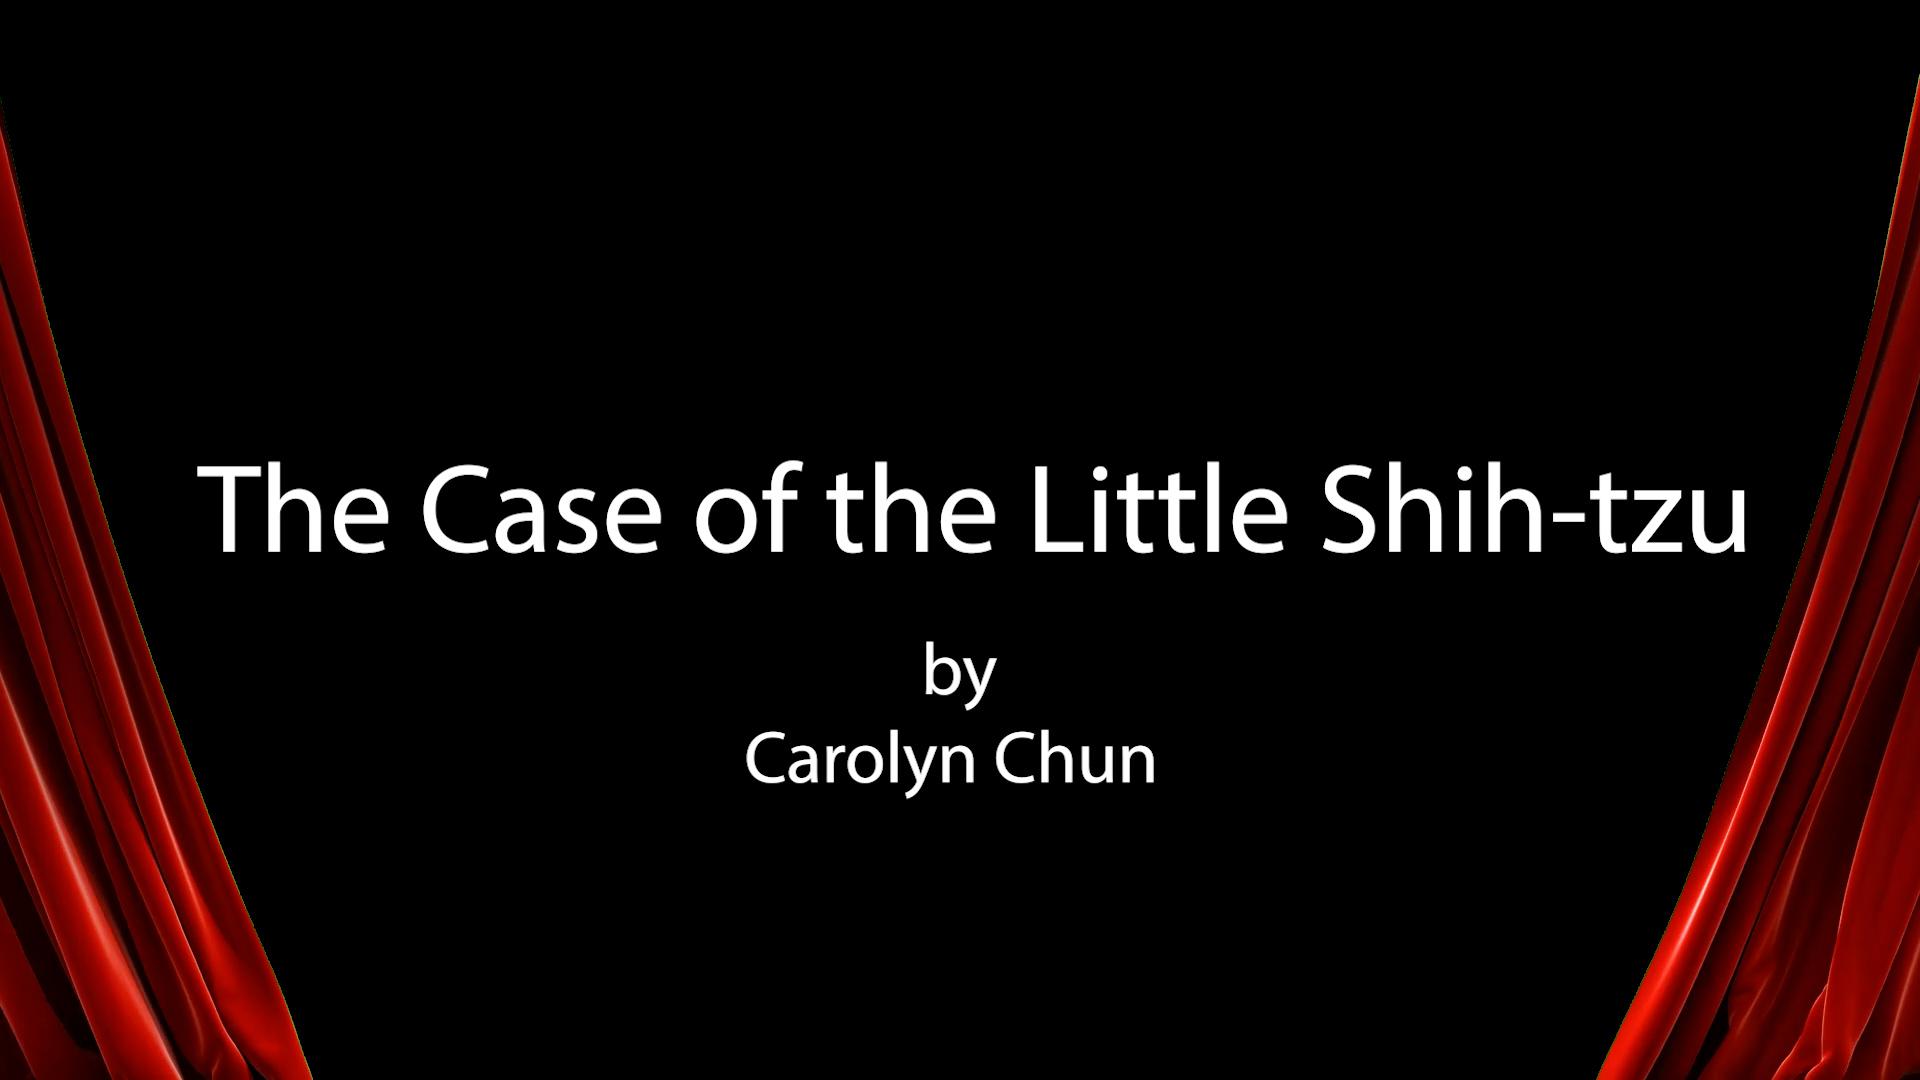 The Case of the Little Shih-tzu